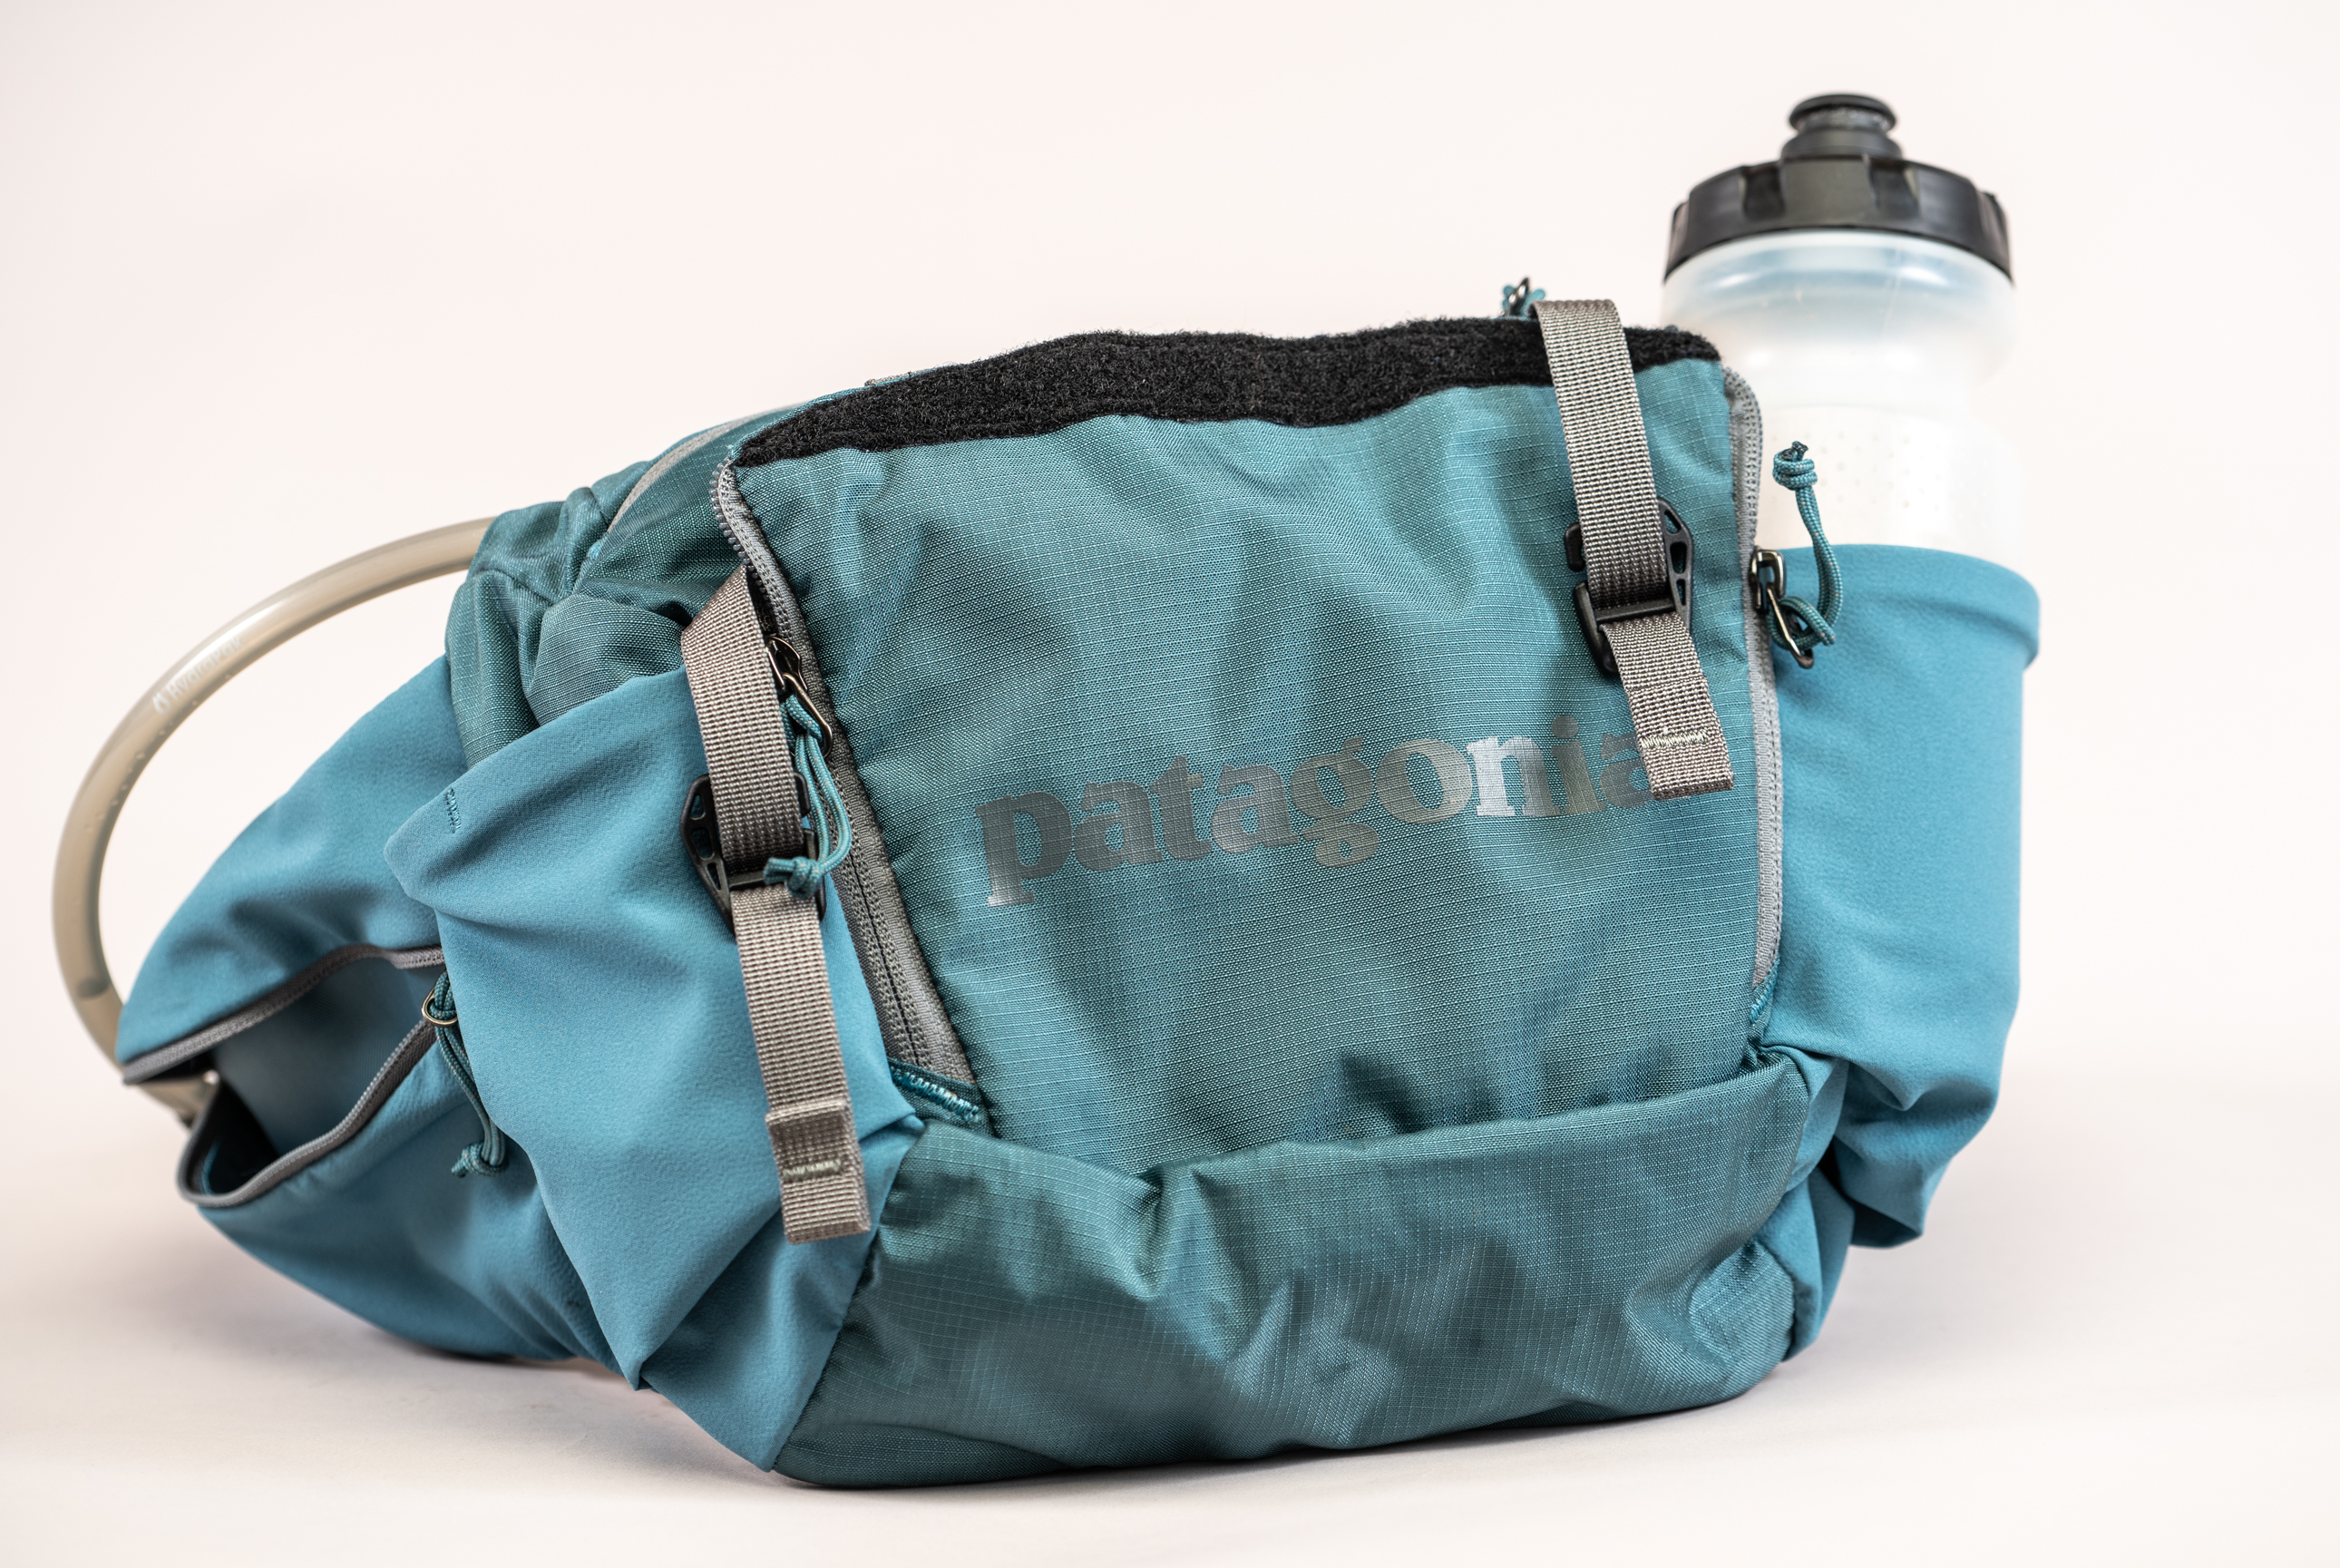 Review: Patagonia Nine Trails 1.5-Liter Waist Pack 8L